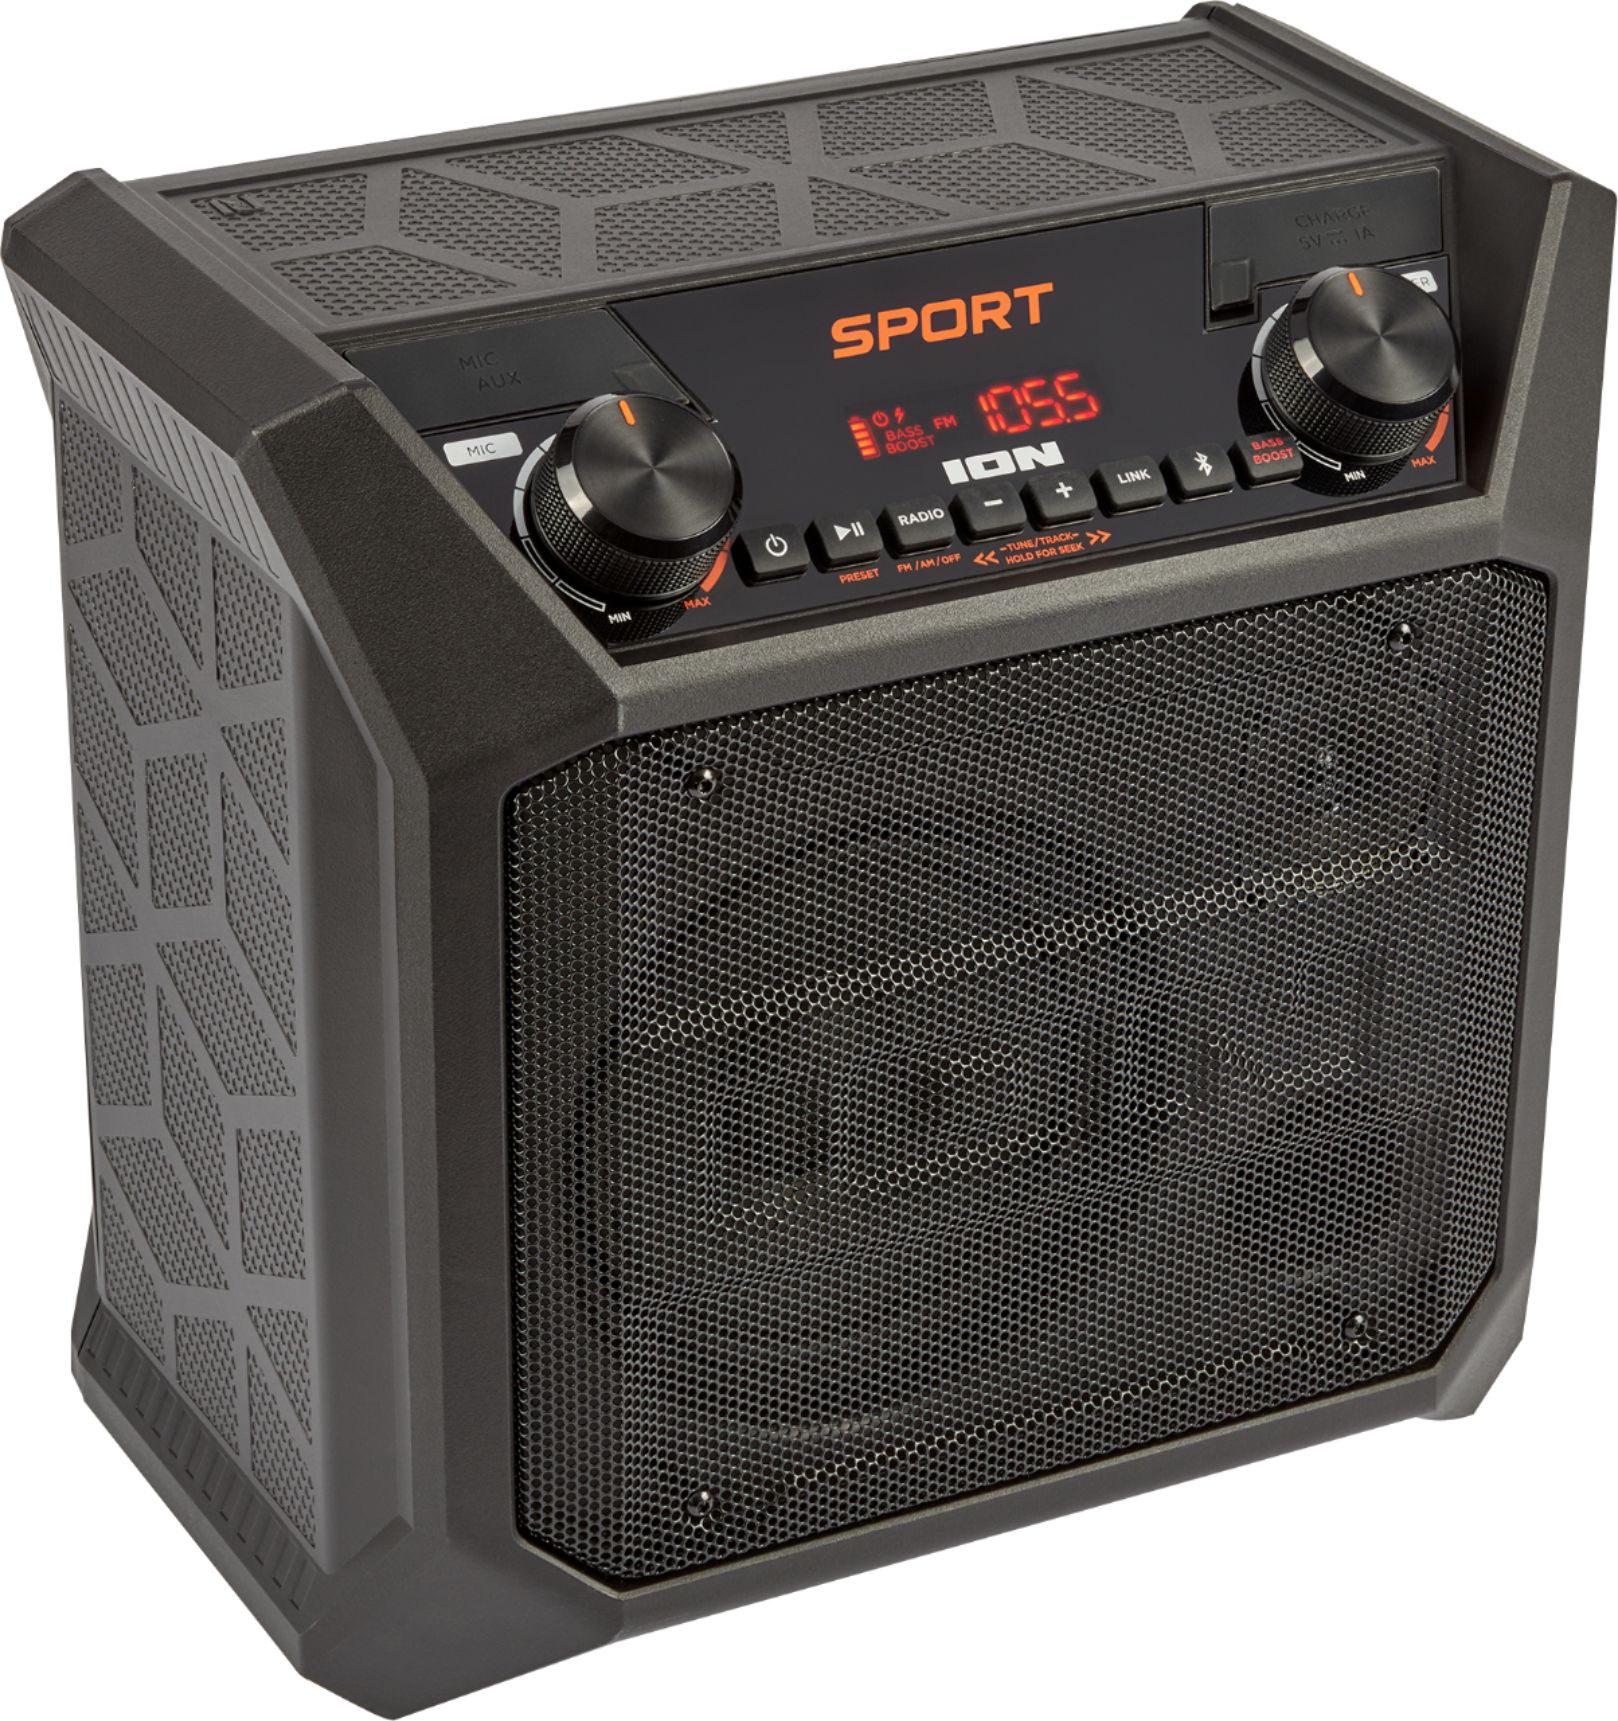 Angle View: ION Audio - Sport Tailgate Portable PA Speaker - Black